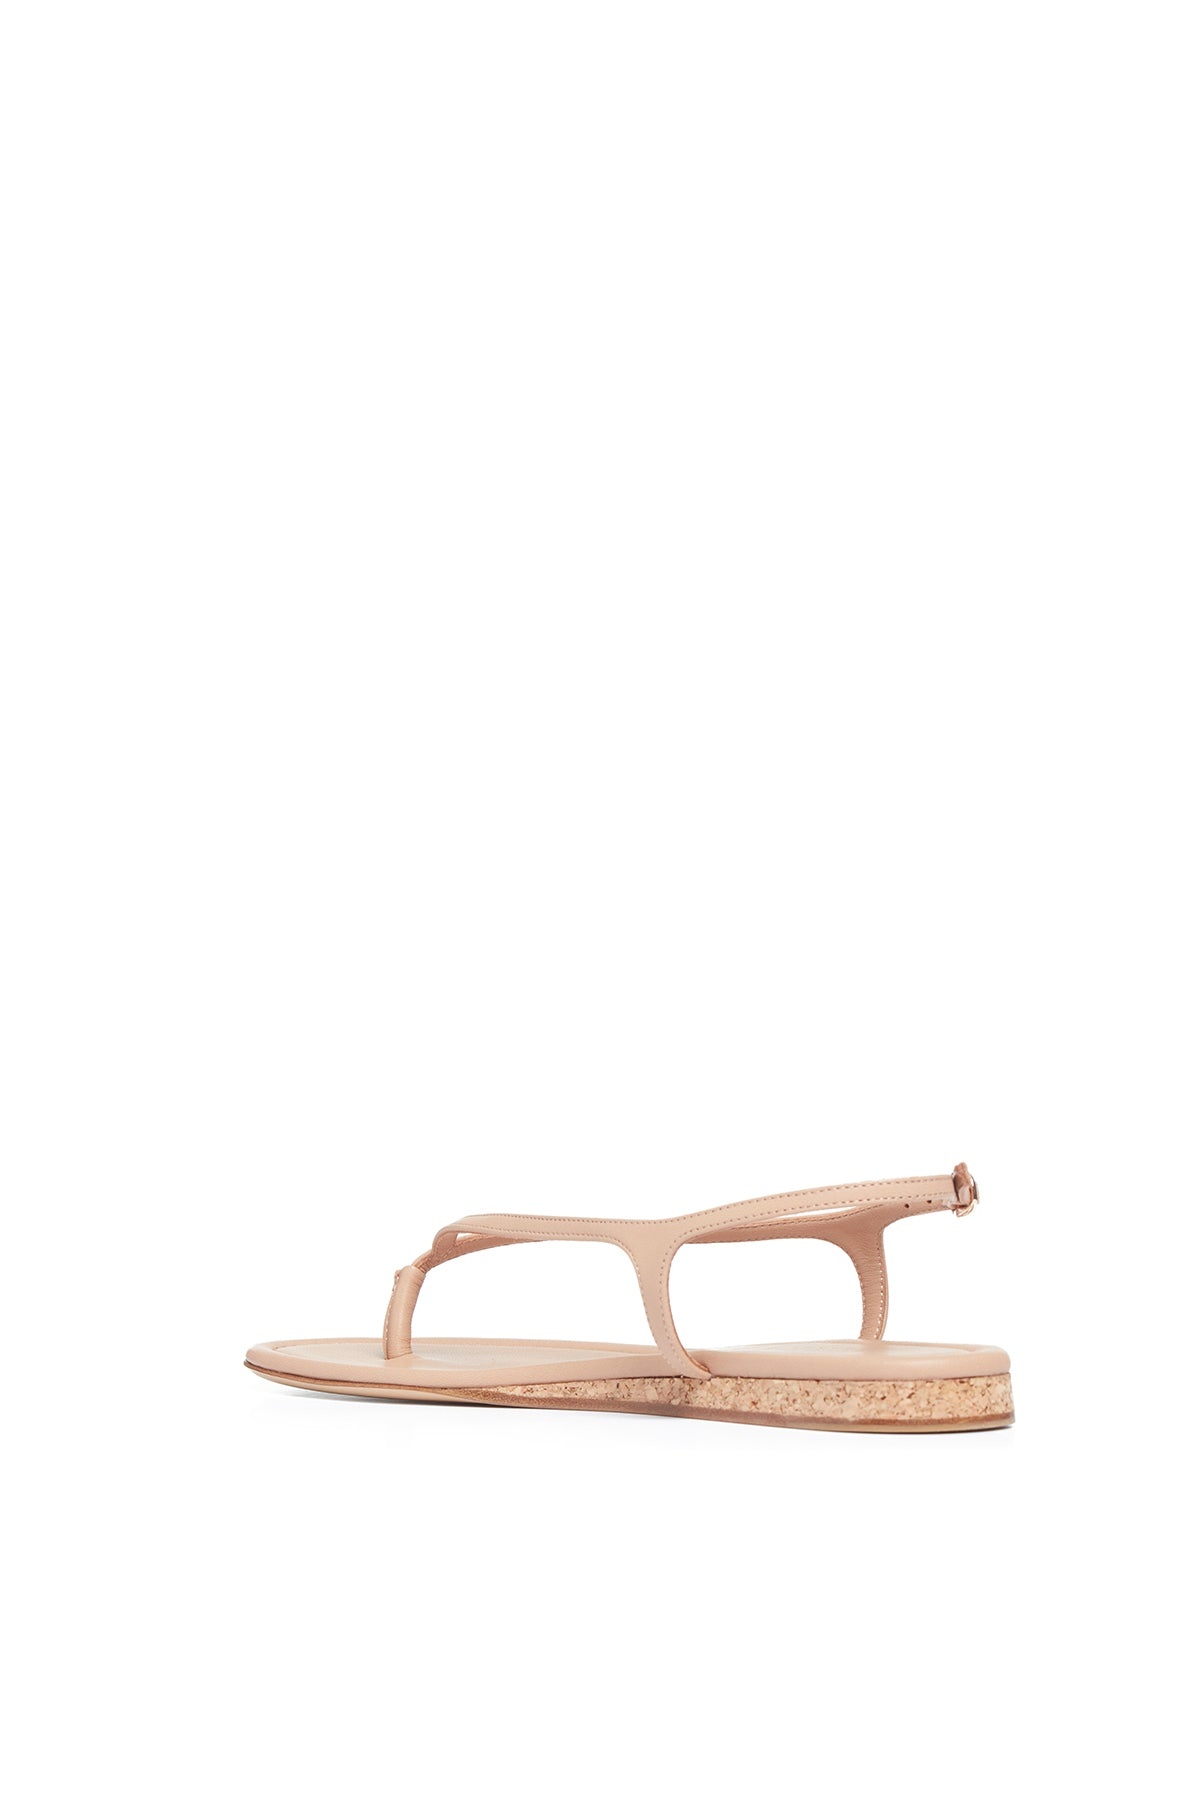 Gia Sandals in Dark Camel Leather - 3